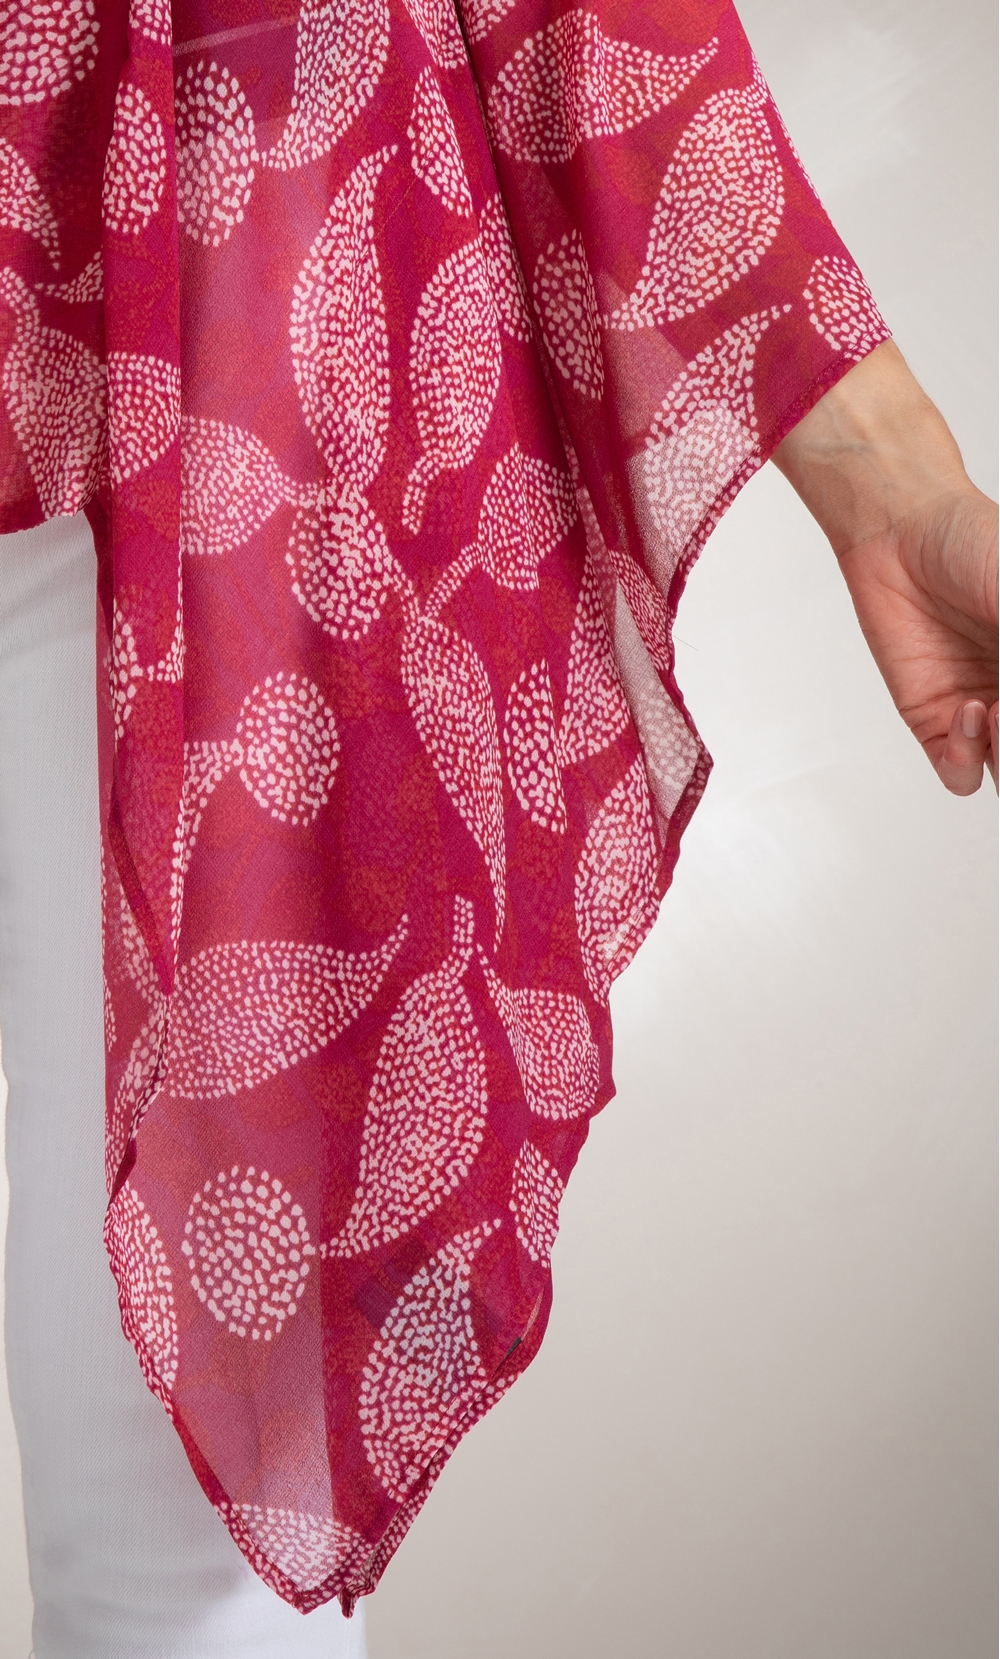 Printed Georgette Open Cover Up